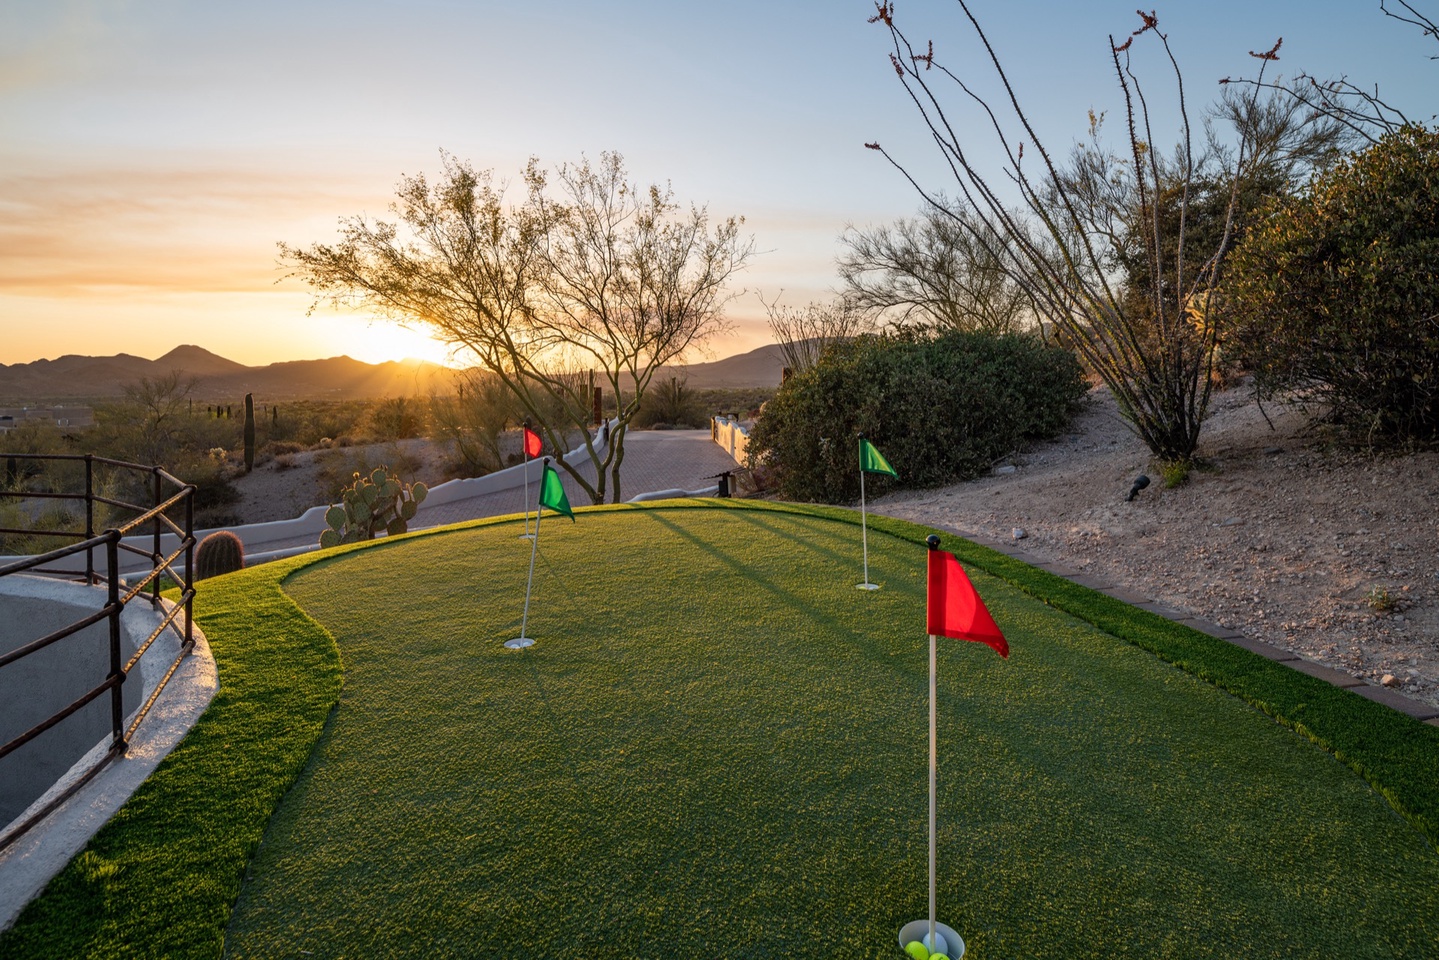 Practice the putting before heading off to your tee time